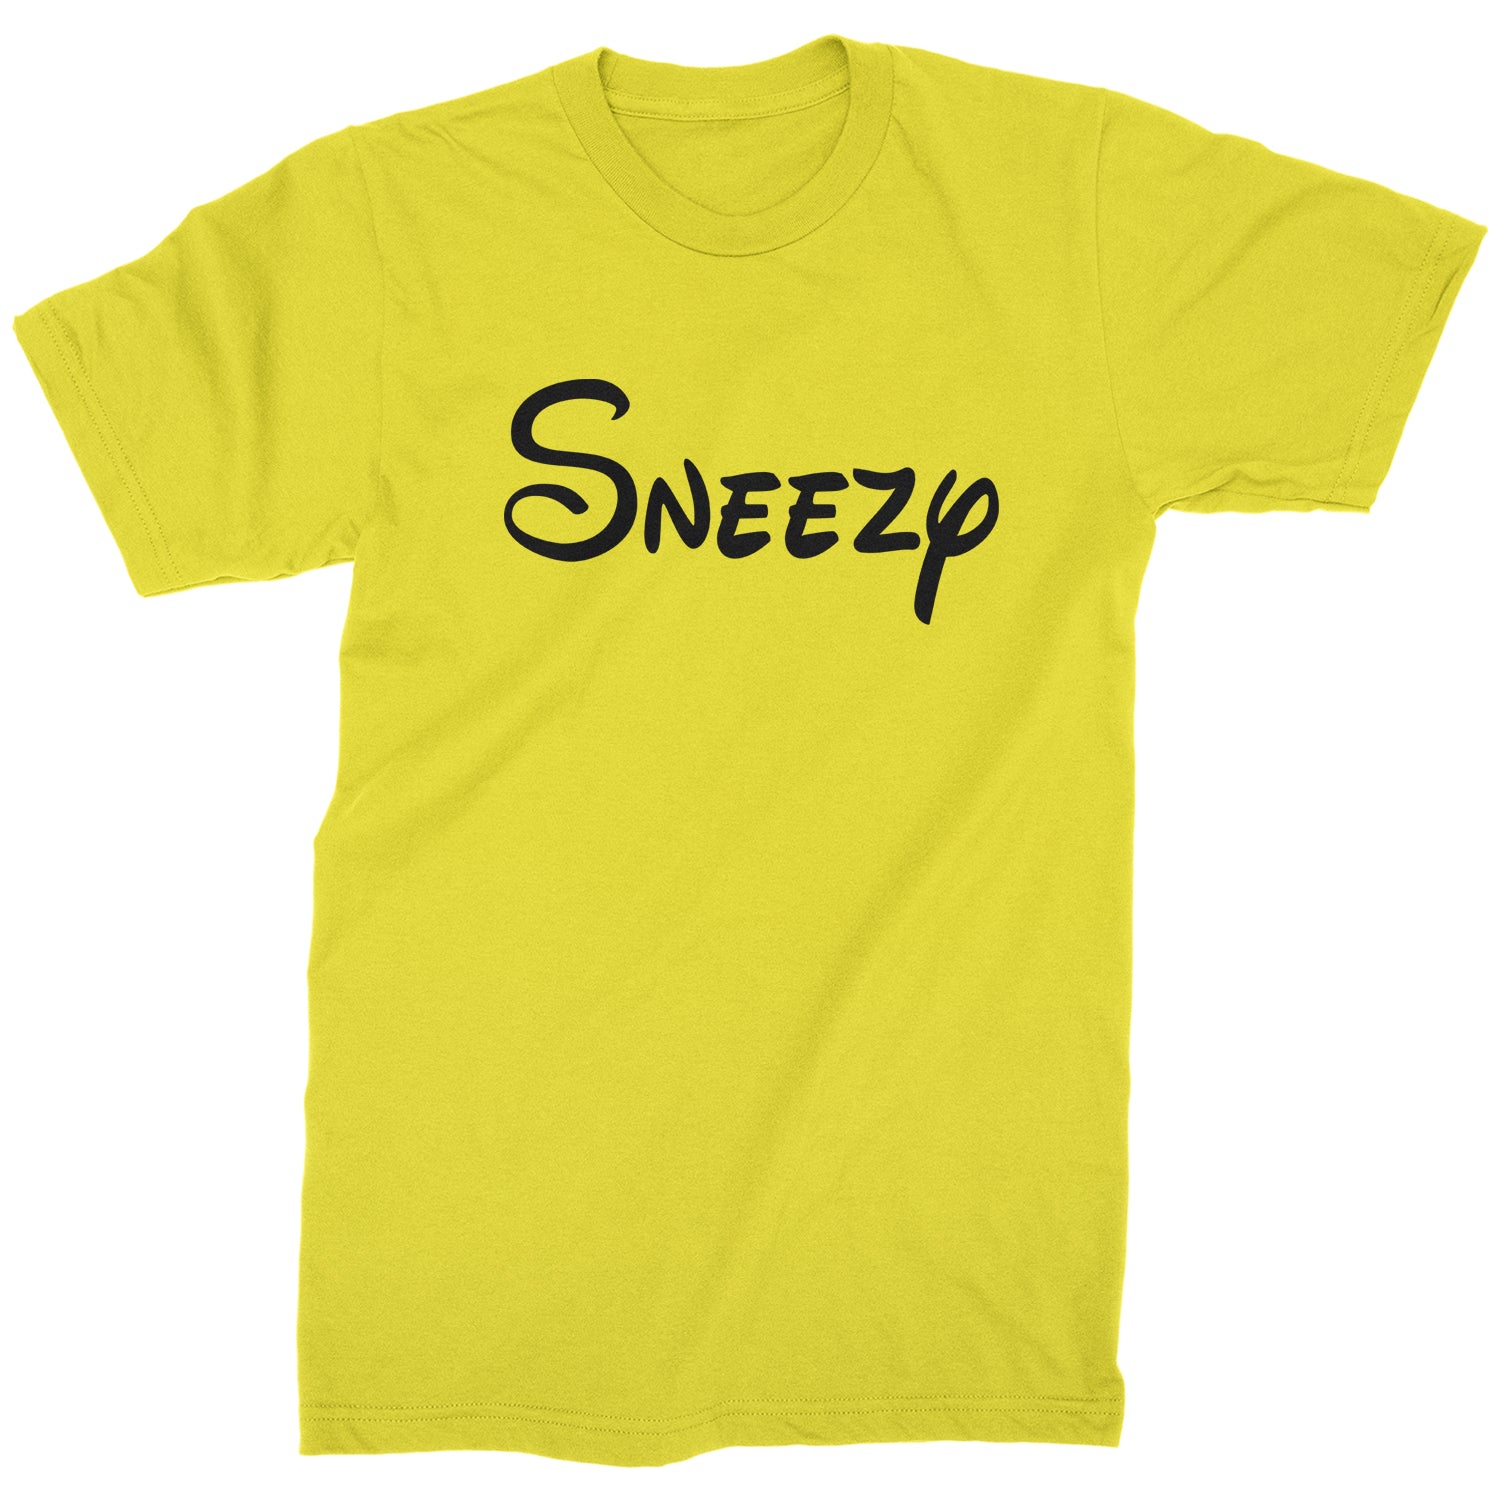 Sneezy - 7 Dwarfs Costume Mens T-shirt and, costume, dwarfs, group, halloween, matching, seven, snow, the, white by Expression Tees